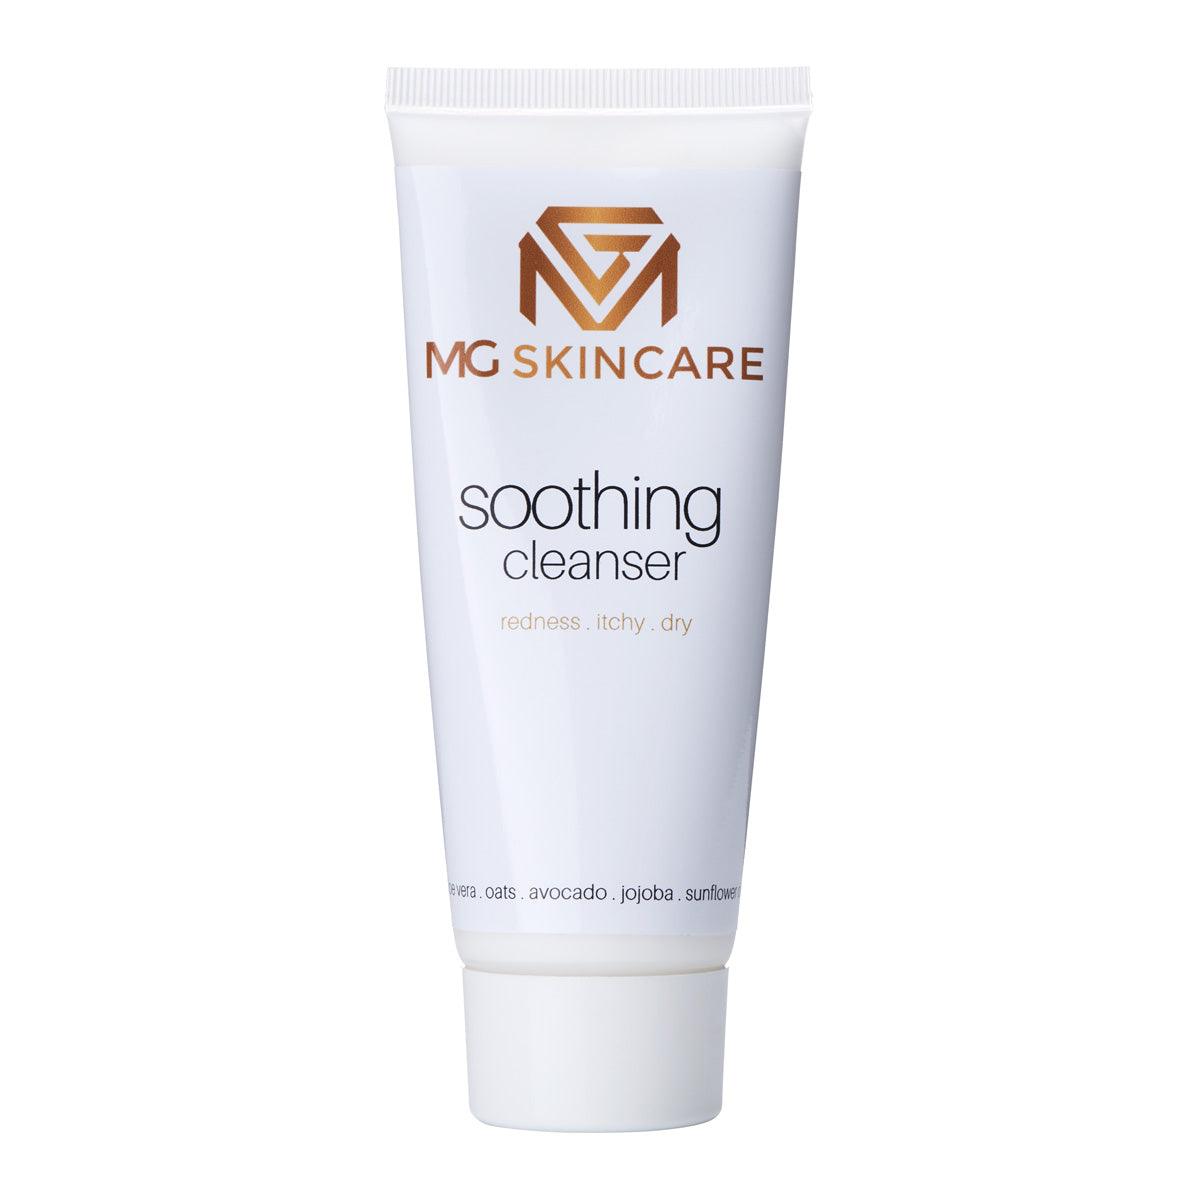 MG Skincare Soothing Facial Cleanser - MG Skincare